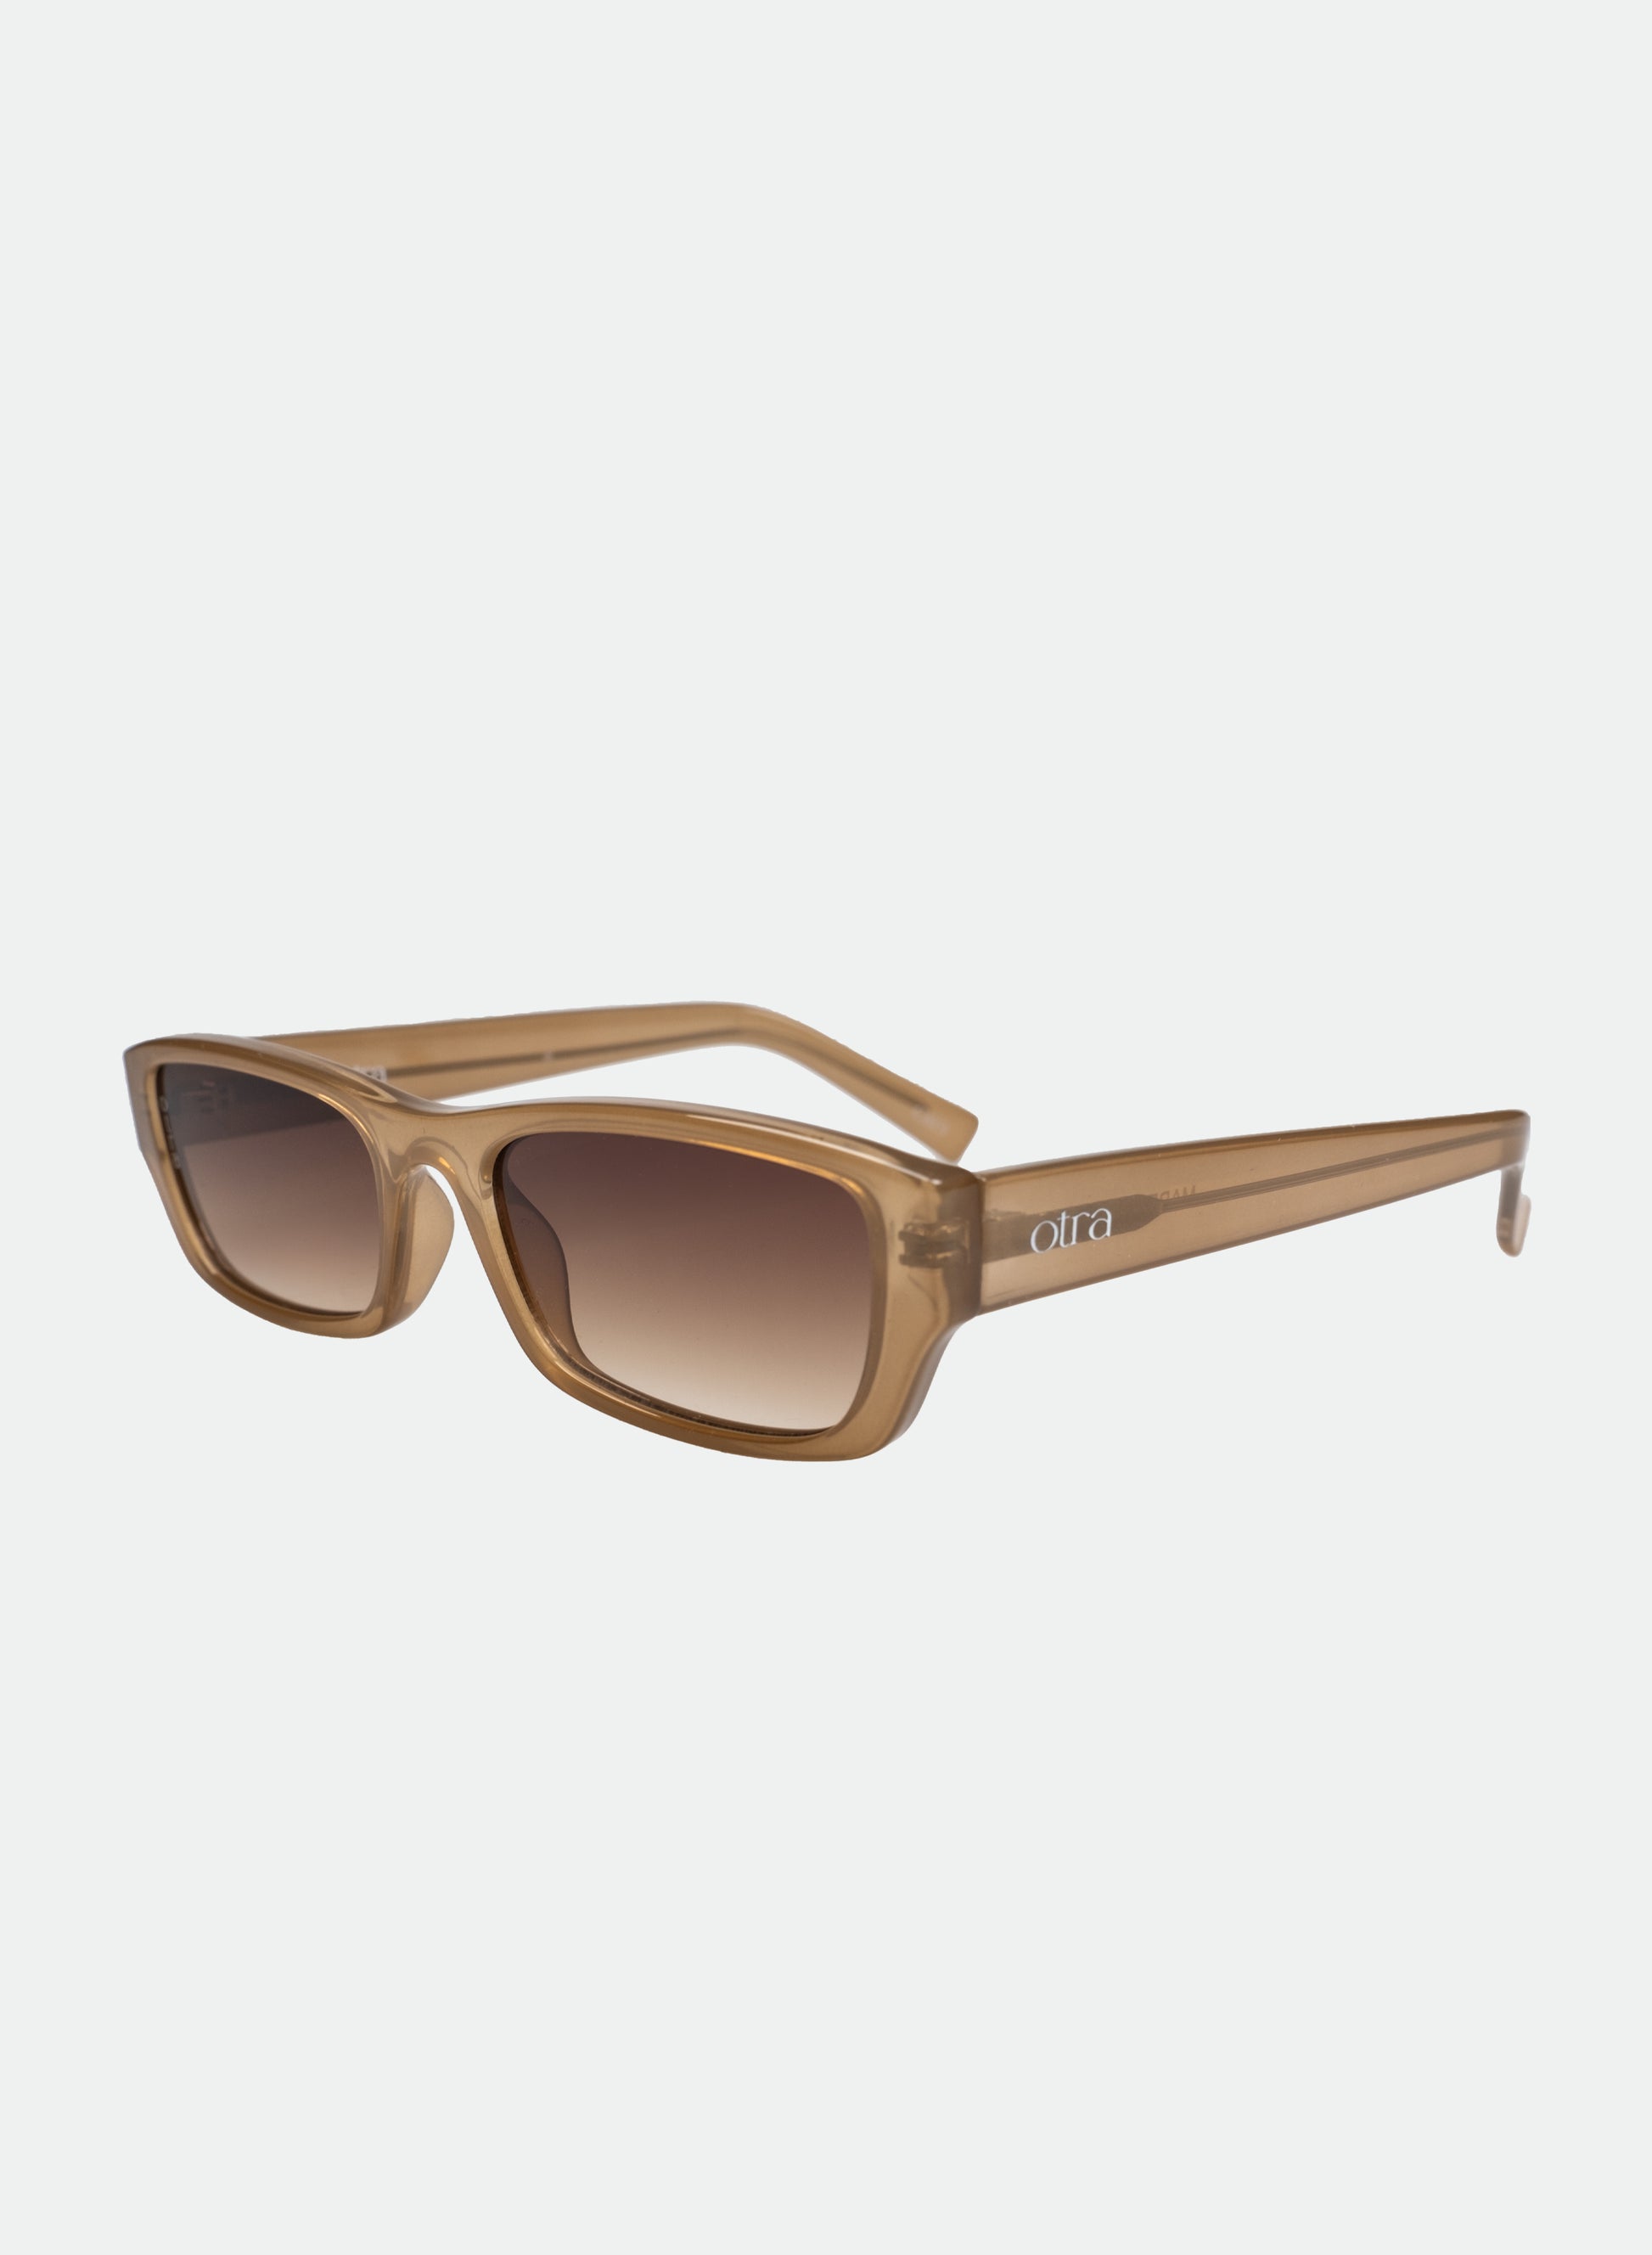 Mabel brown sunglasses side view